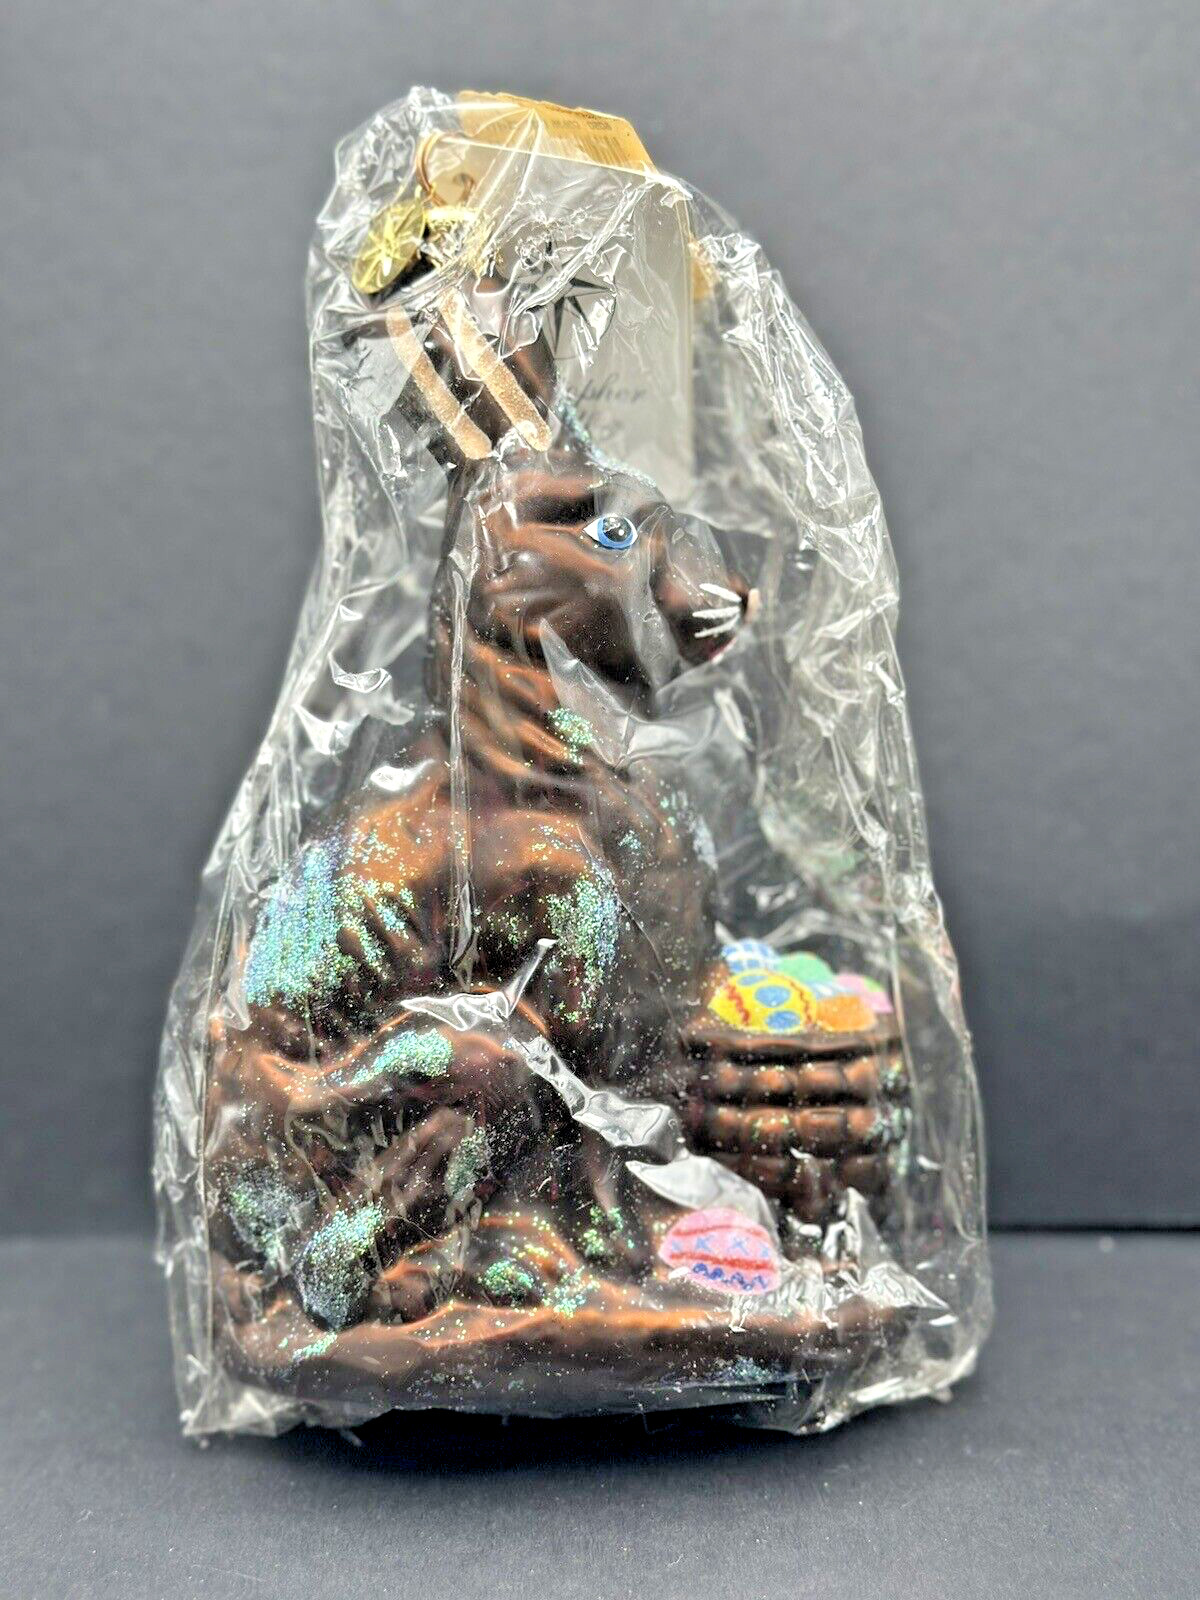 NOS Christopher Radko OLD WORLD CHOCOLATE Easter Bunny Ornament 01-0712-0